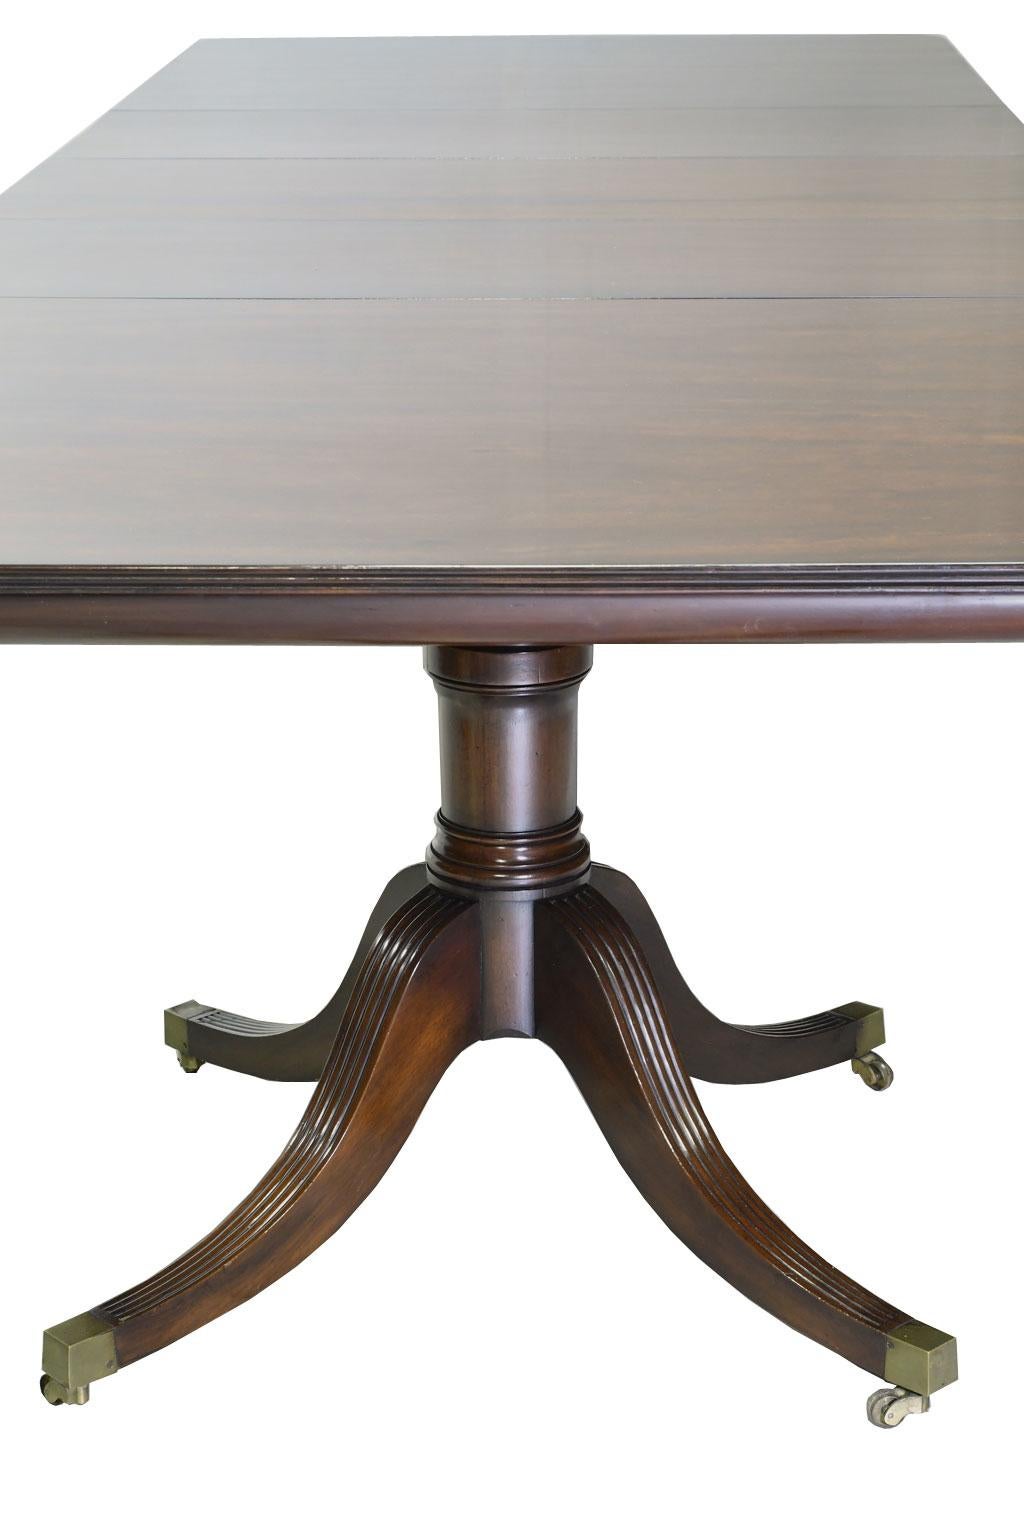 Brass 12' Hepplewhite-Style Dining Table Mahogany, 2 Pedestals, 3 Leaves, circa 1945